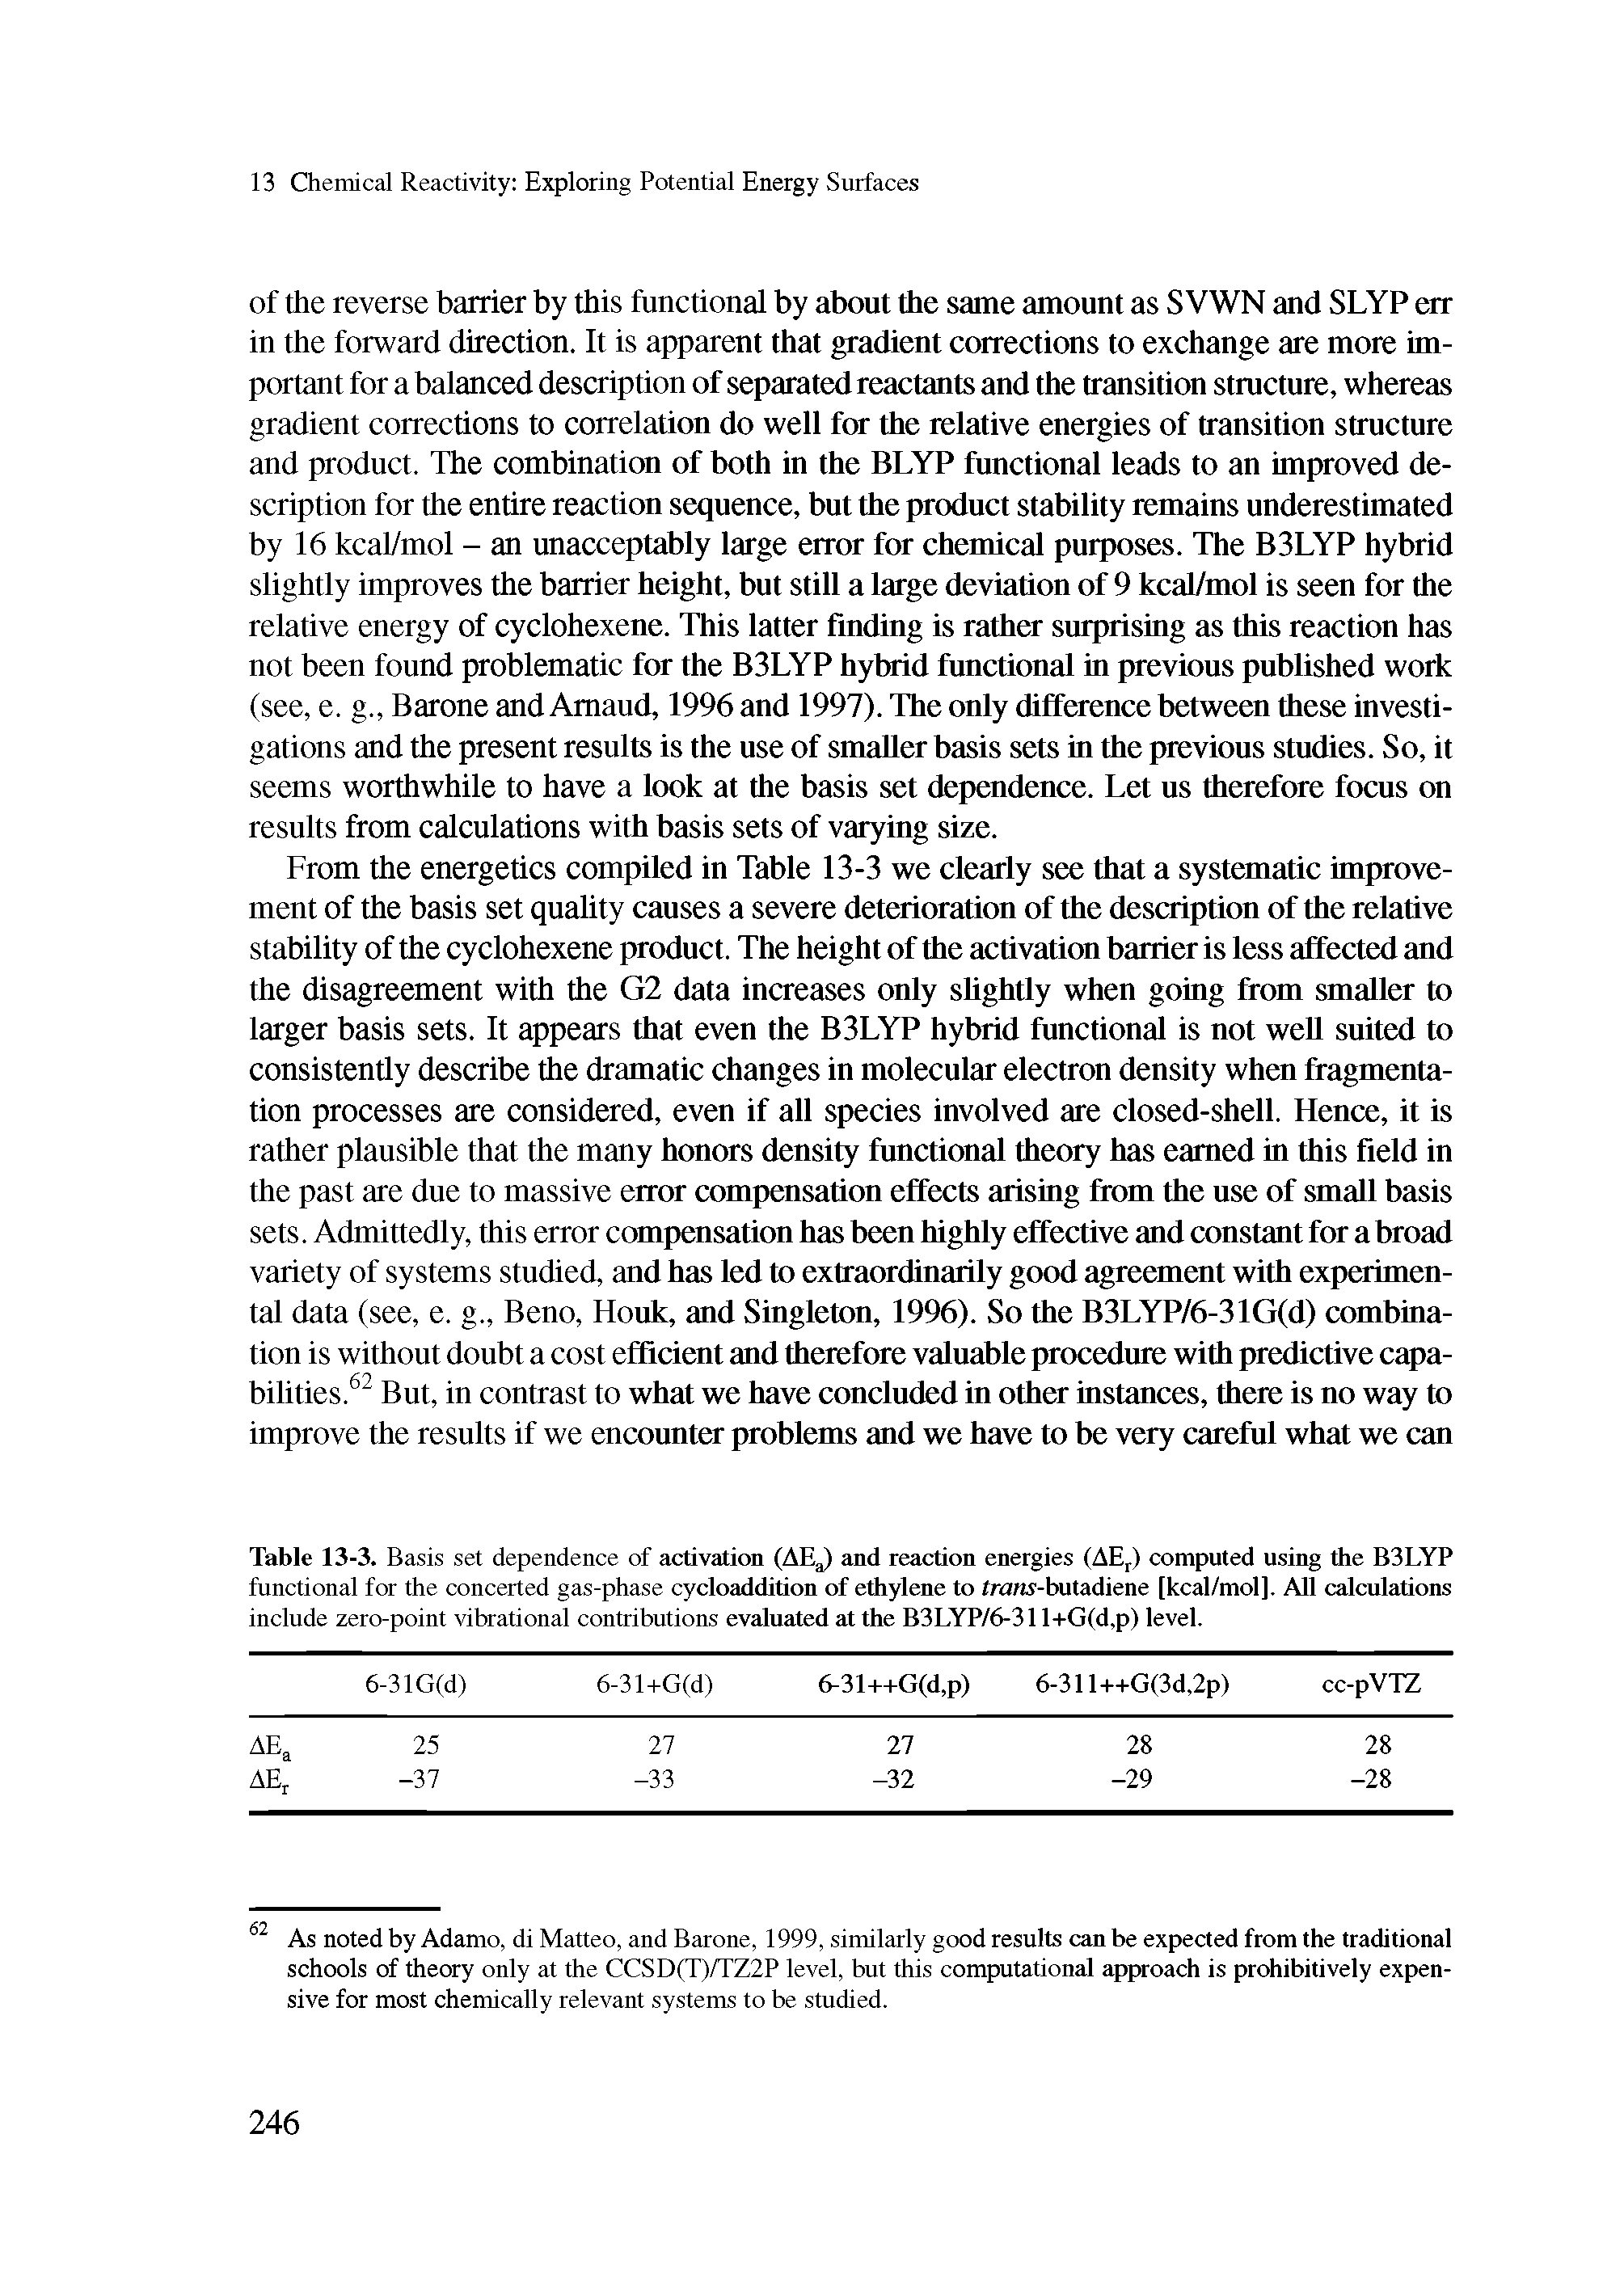 Table 13-3. Basis set dependence of activation (AEa) and reaction energies (AEr) computed using the B3LYP functional for the concerted gas-phase cycloaddition of ethylene to trans-butadiene [kcal/mol]. All calculations include zero-point vibrational contributions evaluated at the B3LYP/6-311+G(d,p) level.